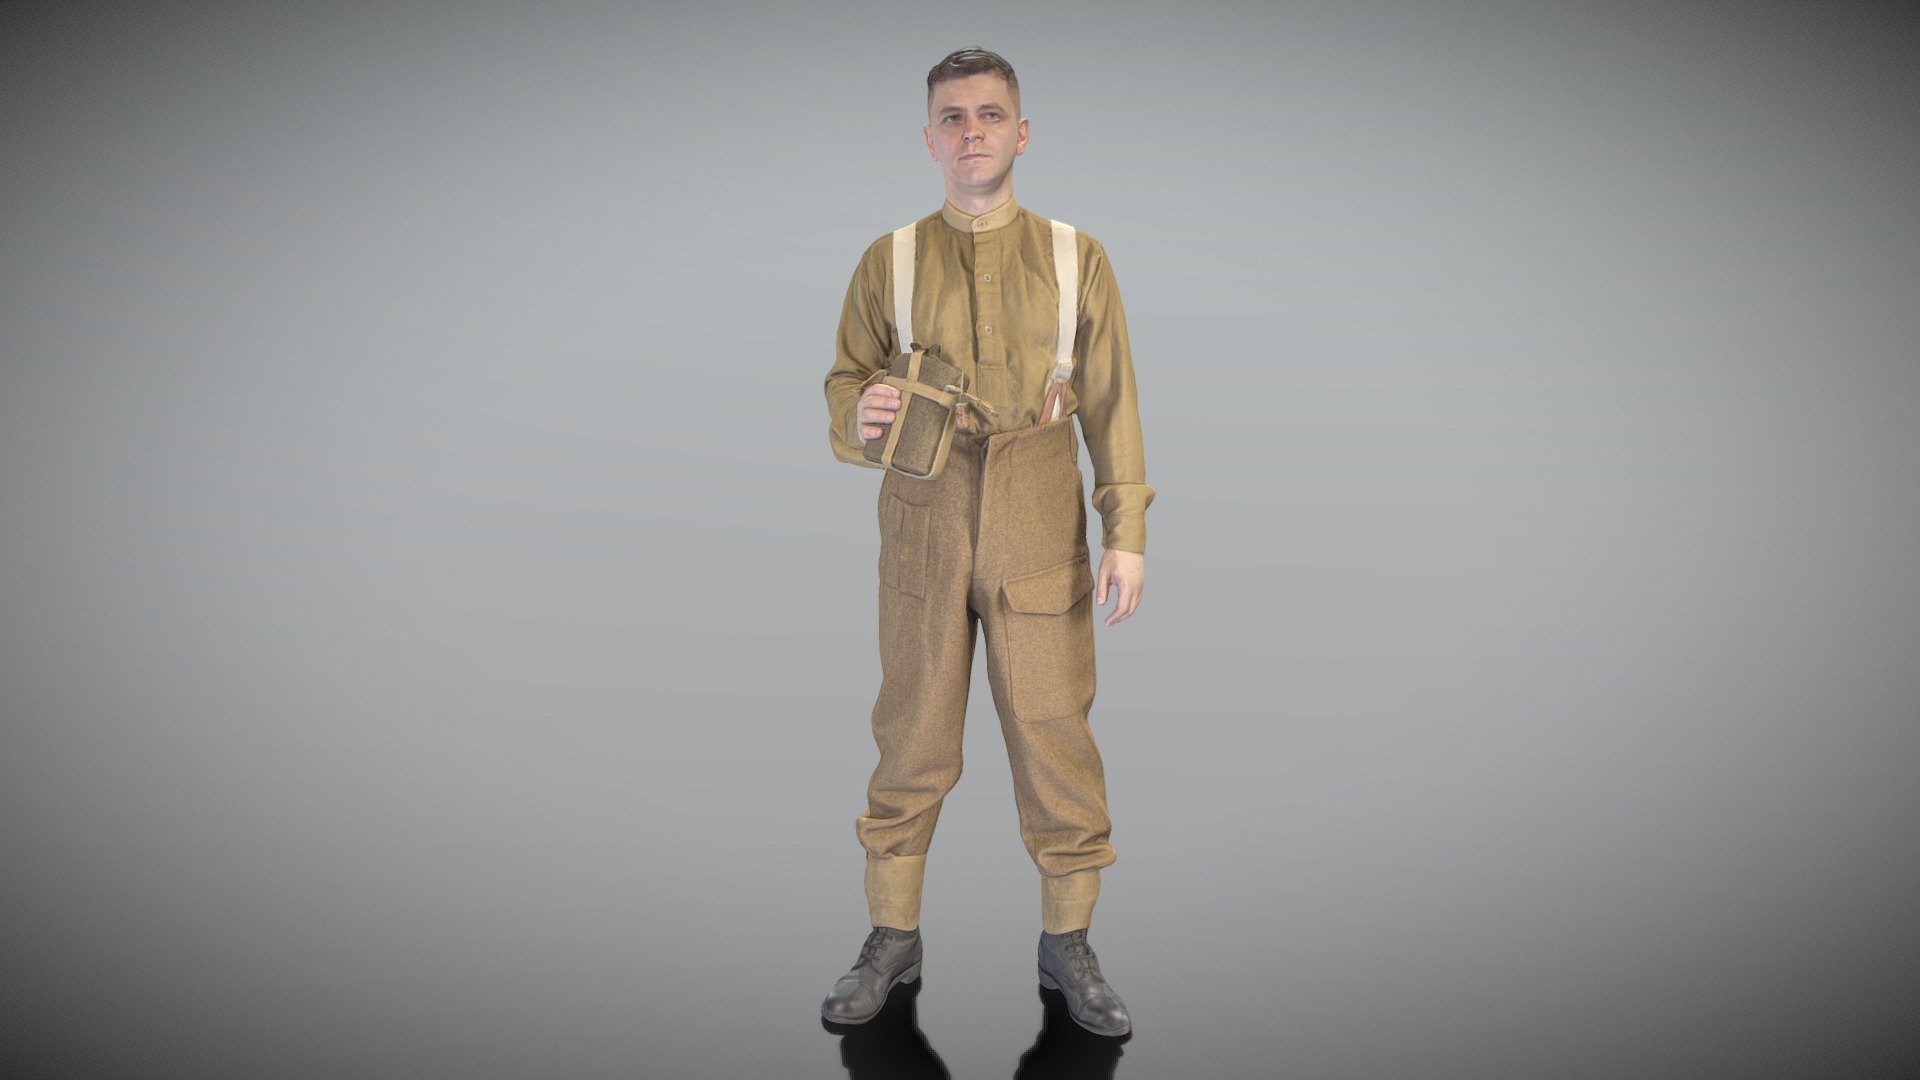 This is a true human size and detailed model of a British infantry character from 1940s. All props and suit are original. The model is captured in casual pose to be perfectly matching to variety of architectural visualization, background character, World War 2 reconstruction, performance, VR/AR content, etc.

Technical characteristics:




digital double 3d scan model

decimated model (100k triangles)

sufficiently clean

PBR textures: Diffuse, Normal, Specular maps

non-overlapping UV map

Download package includes Cinema 4D project file with Redshift shader, OBJ, FBX files, which are applicable for 3ds Max, Maya, Unreal Engine, Unity, Blender, etc. All the textures included into the main archive.

BONUSE: in this package you will also get a high-poly (.ztl tool) clean and retopologized automatically via ZRemesher 3d model in zBrush, thus youll be able to make your own editing of the purchased 3d model.

3D EVERYTHING - British infantry from World War 2 348 - Buy Royalty Free 3D model by deep3dstudio 3d model